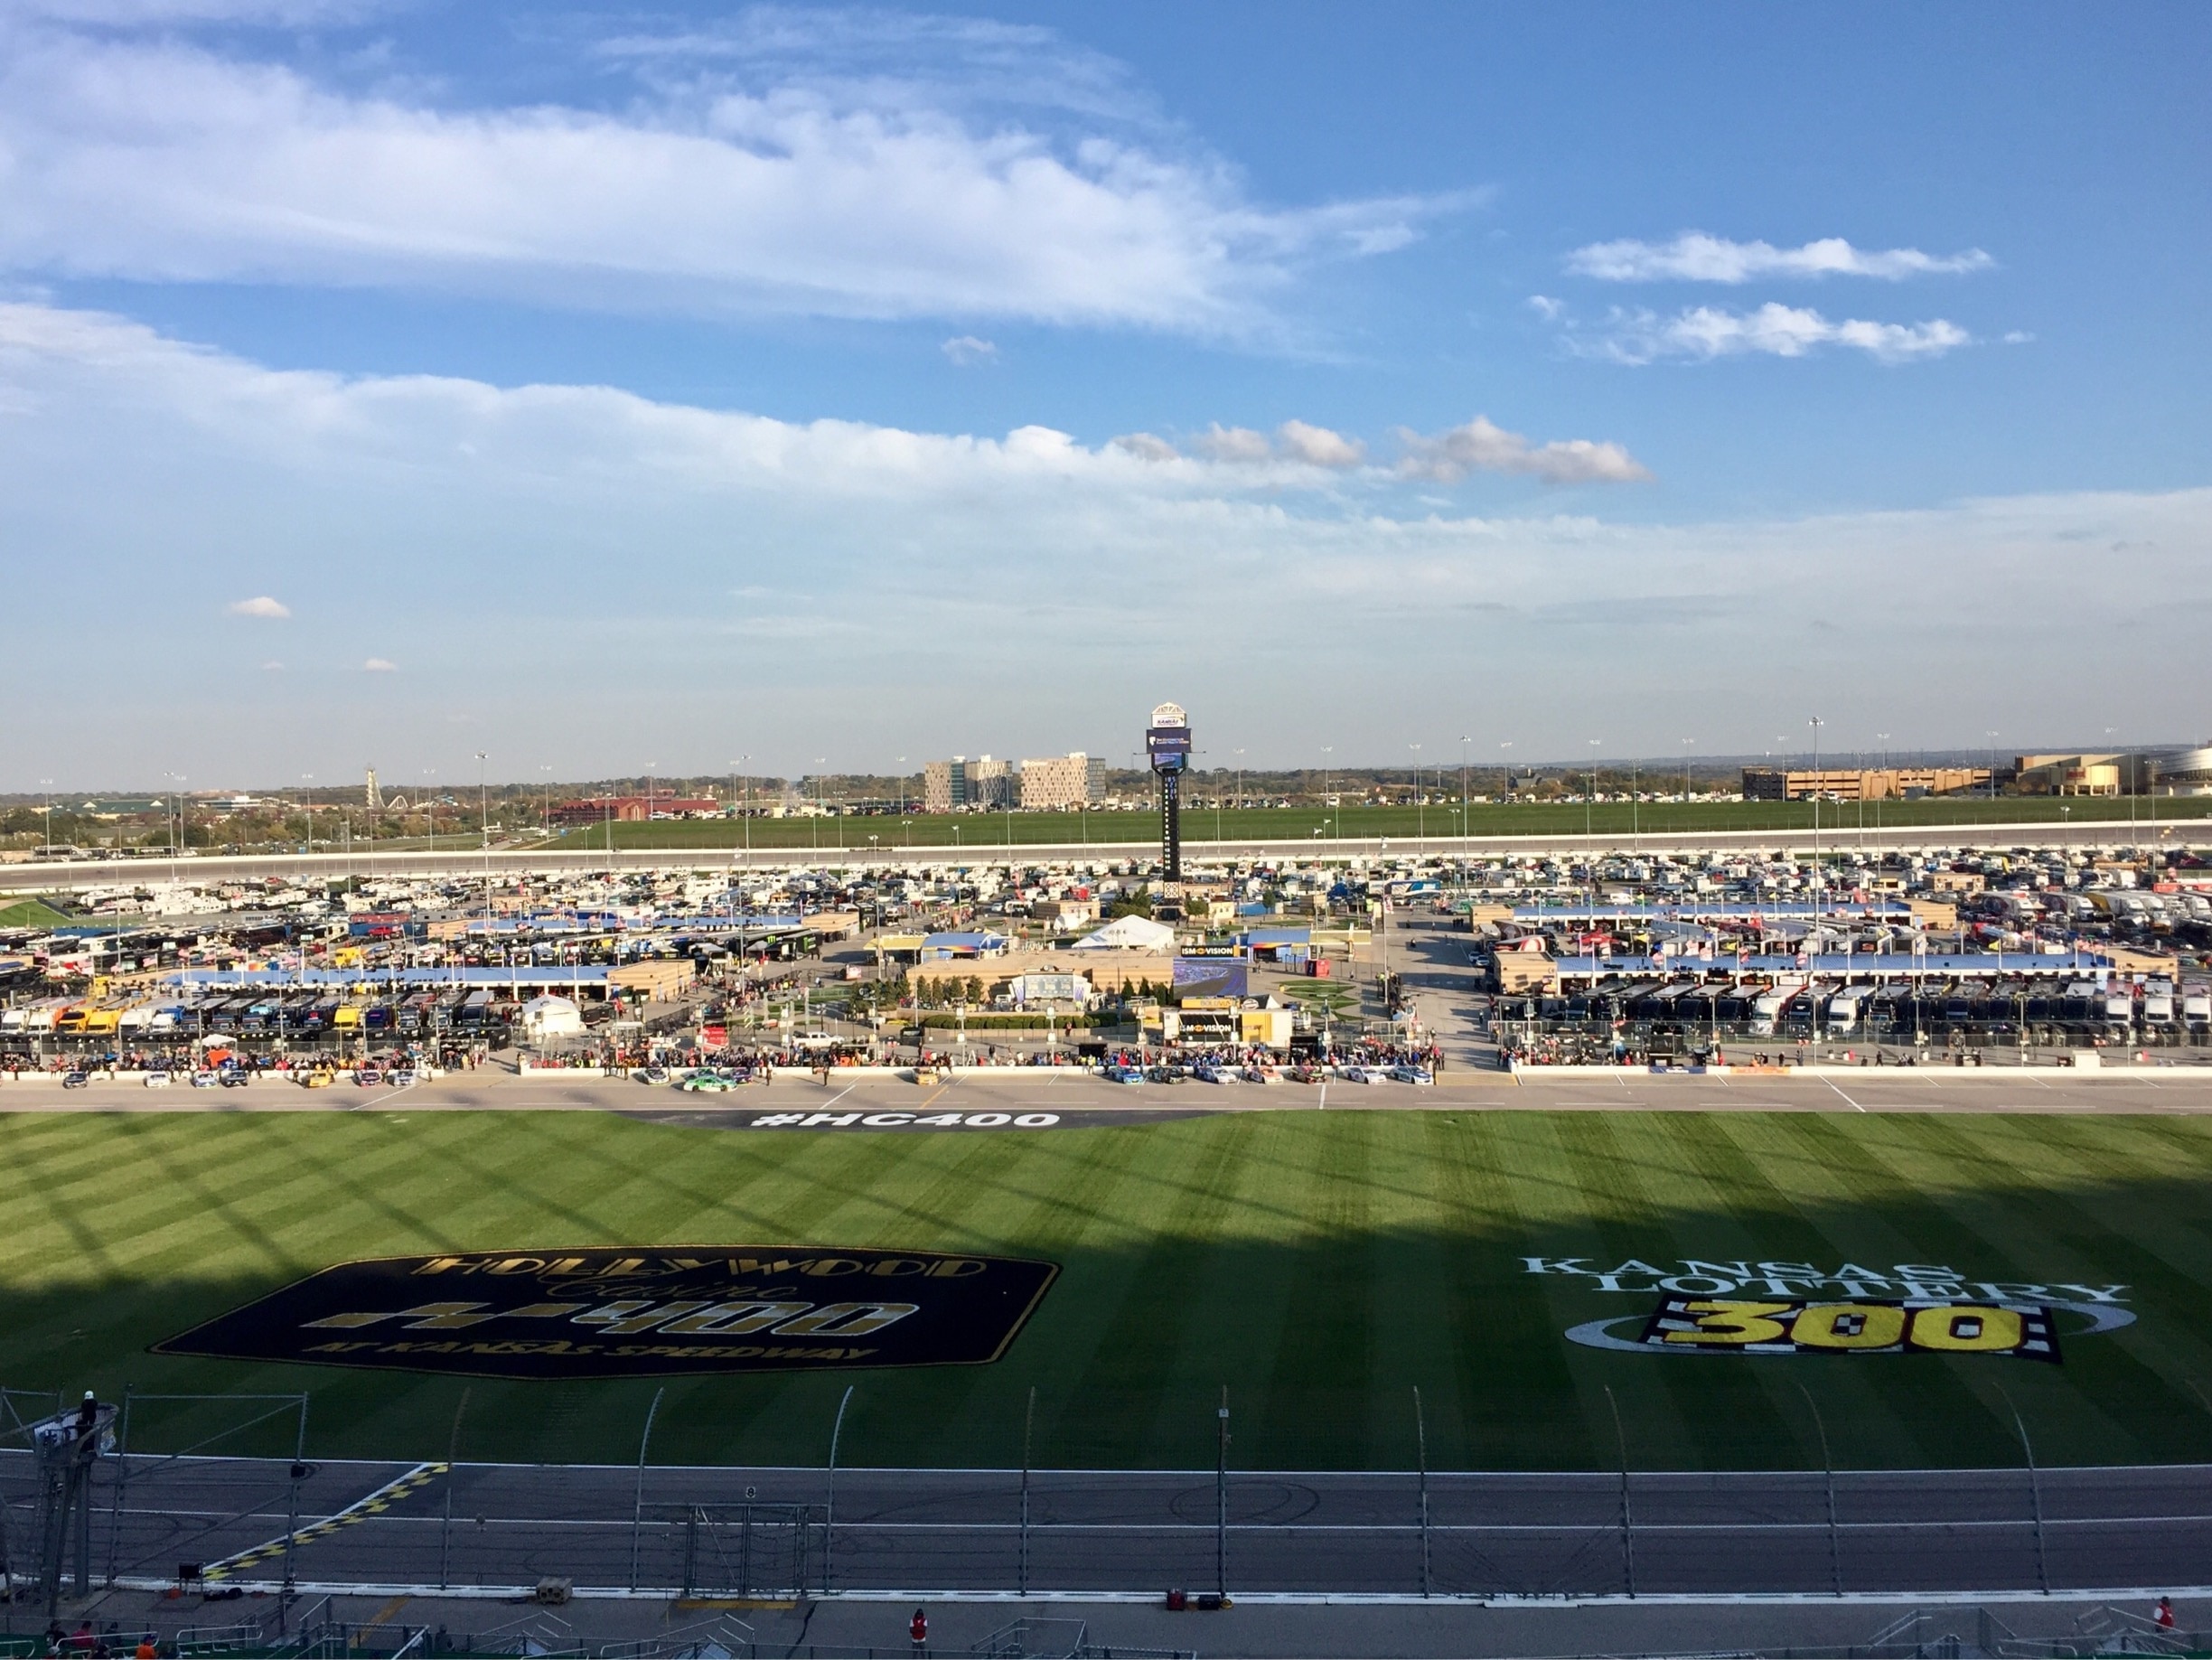 Here for a weekend of NASCAR races. Tonight is qualifying and the ACRA race. 